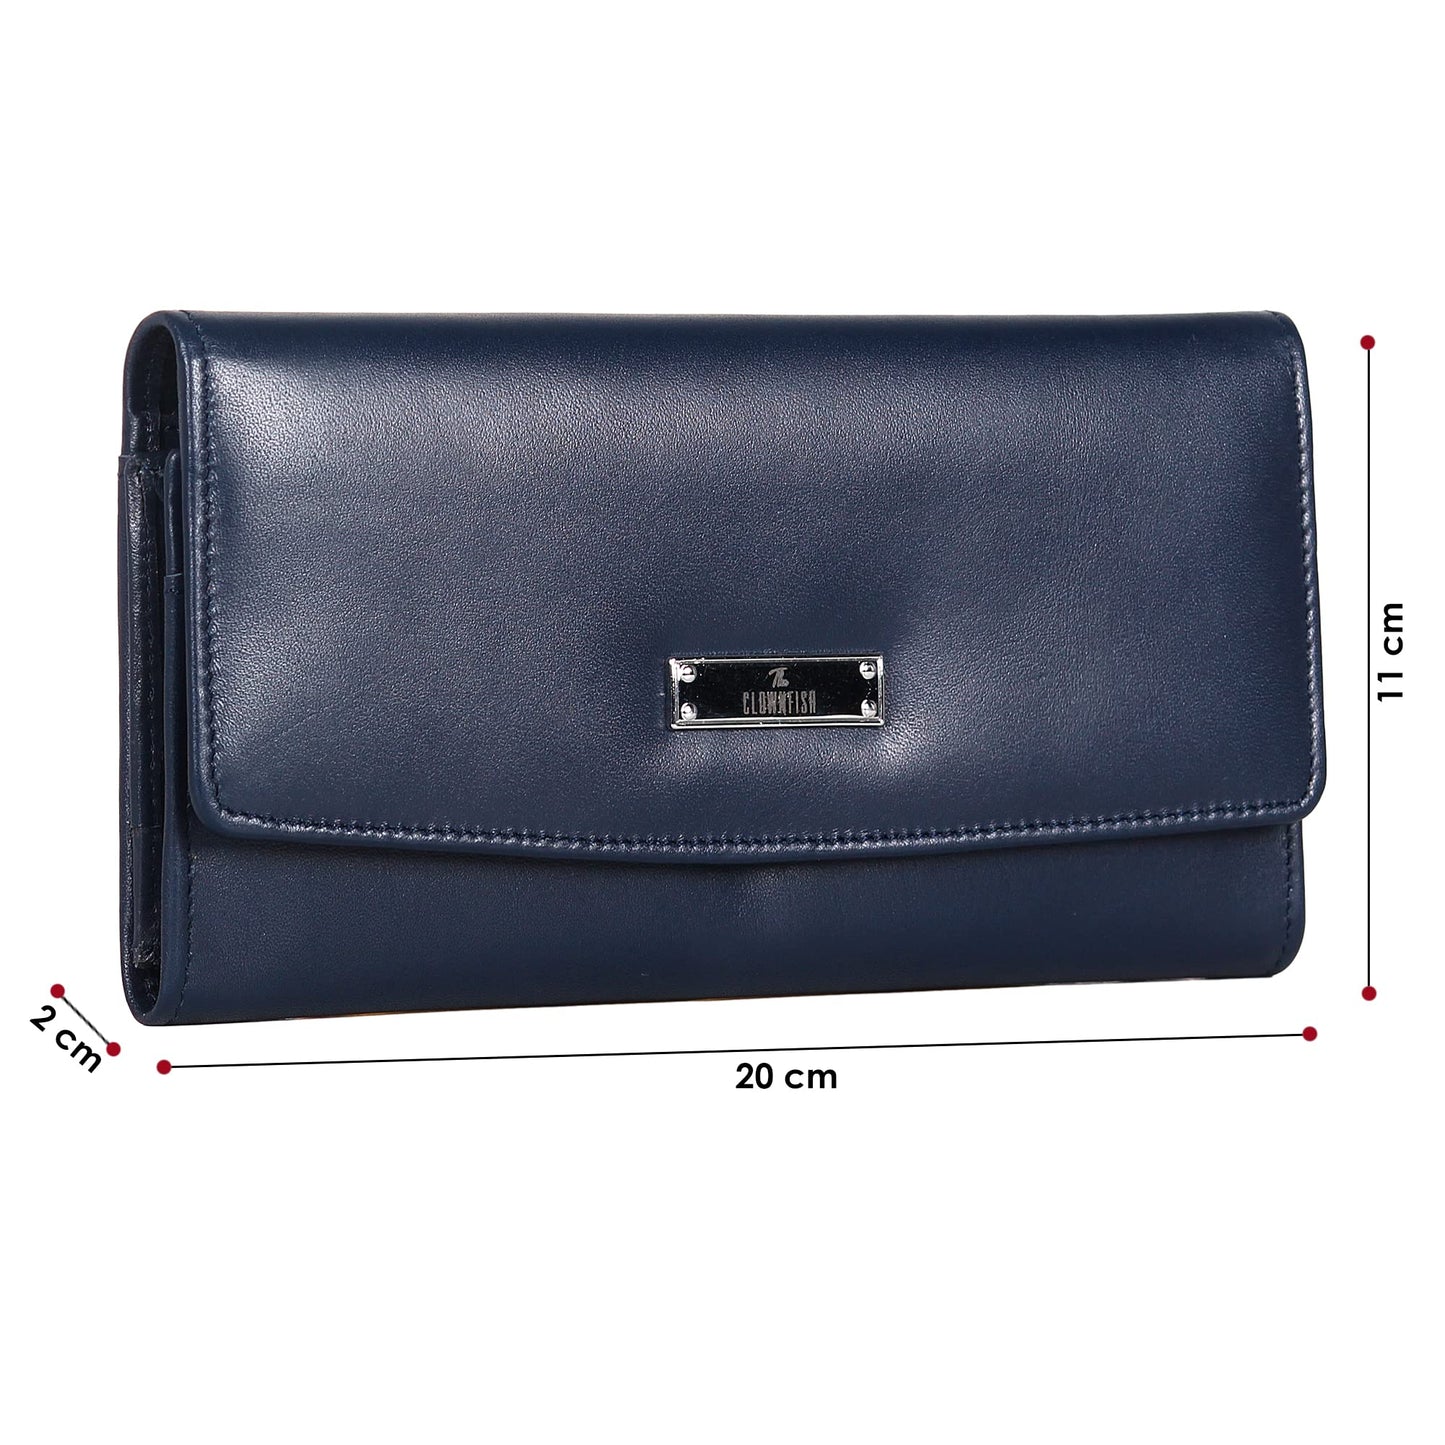 THE CLOWNFISH Zia Genuine Leather Bi-Fold Zip Around Wallet for Women with Multiple Card Slots & Coin Pocket (Navy Blue)